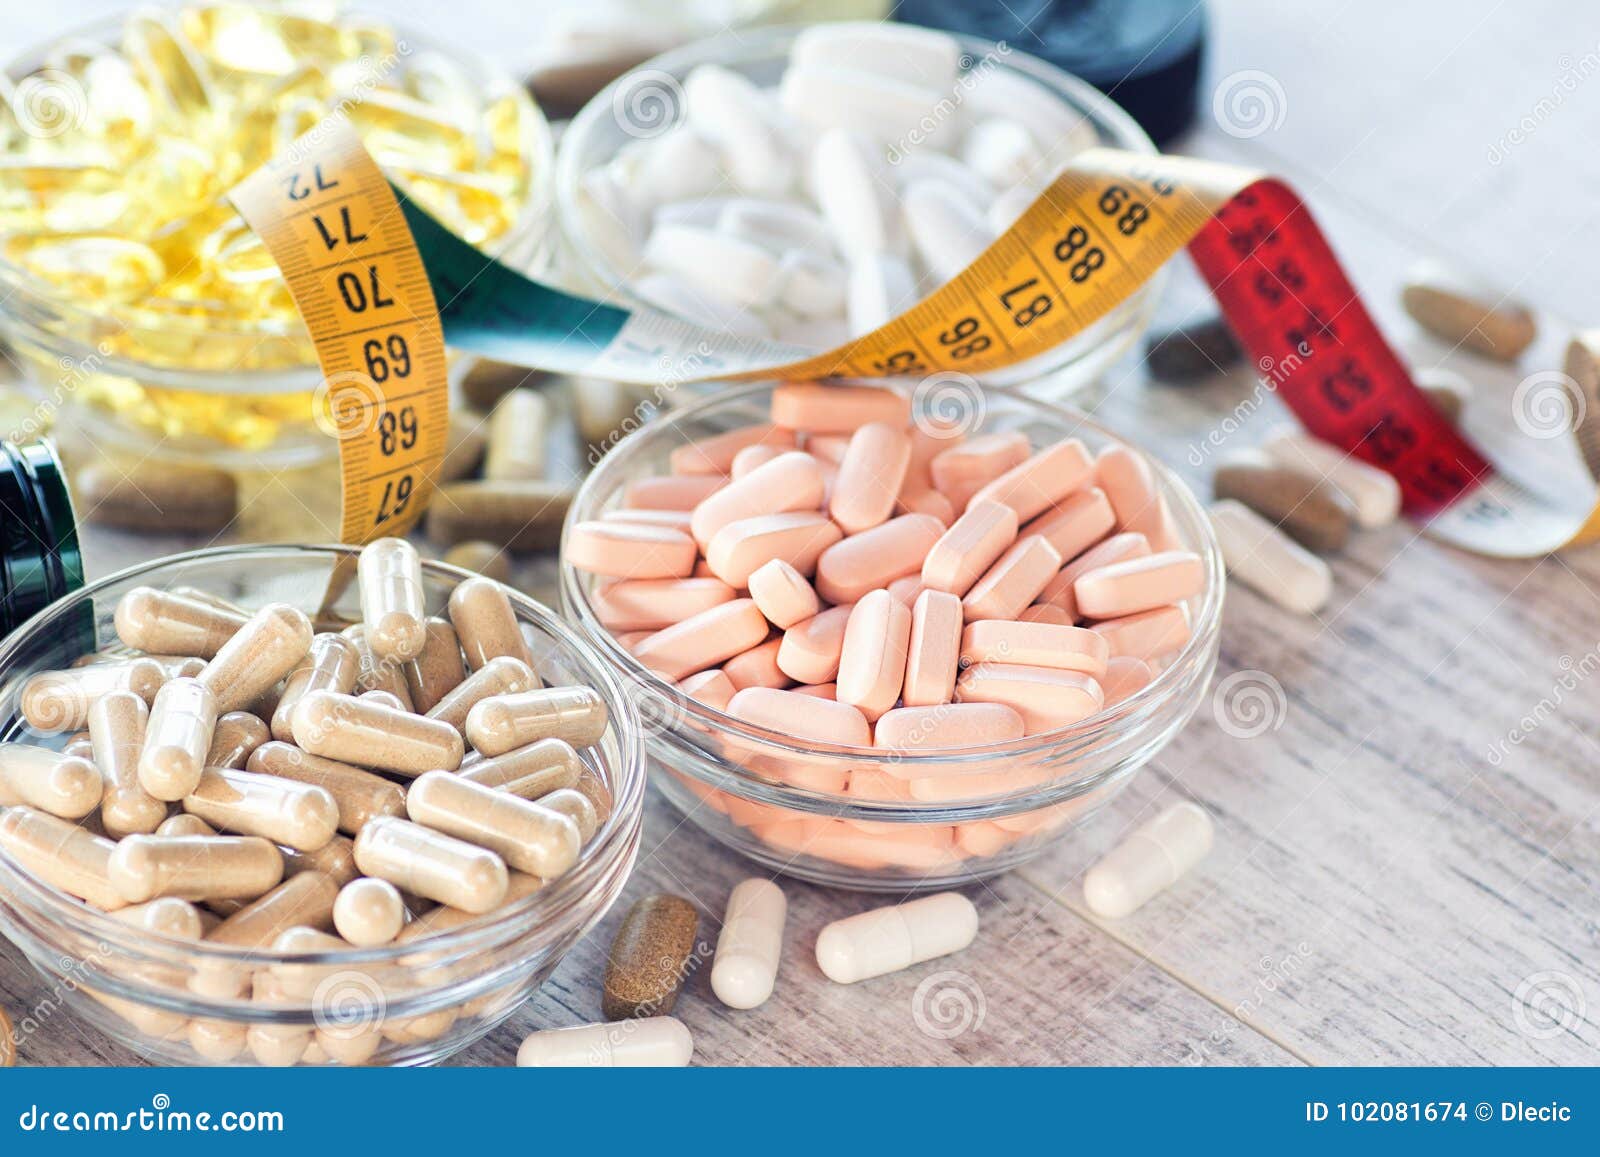 nutritional supplements in capsules and tablets